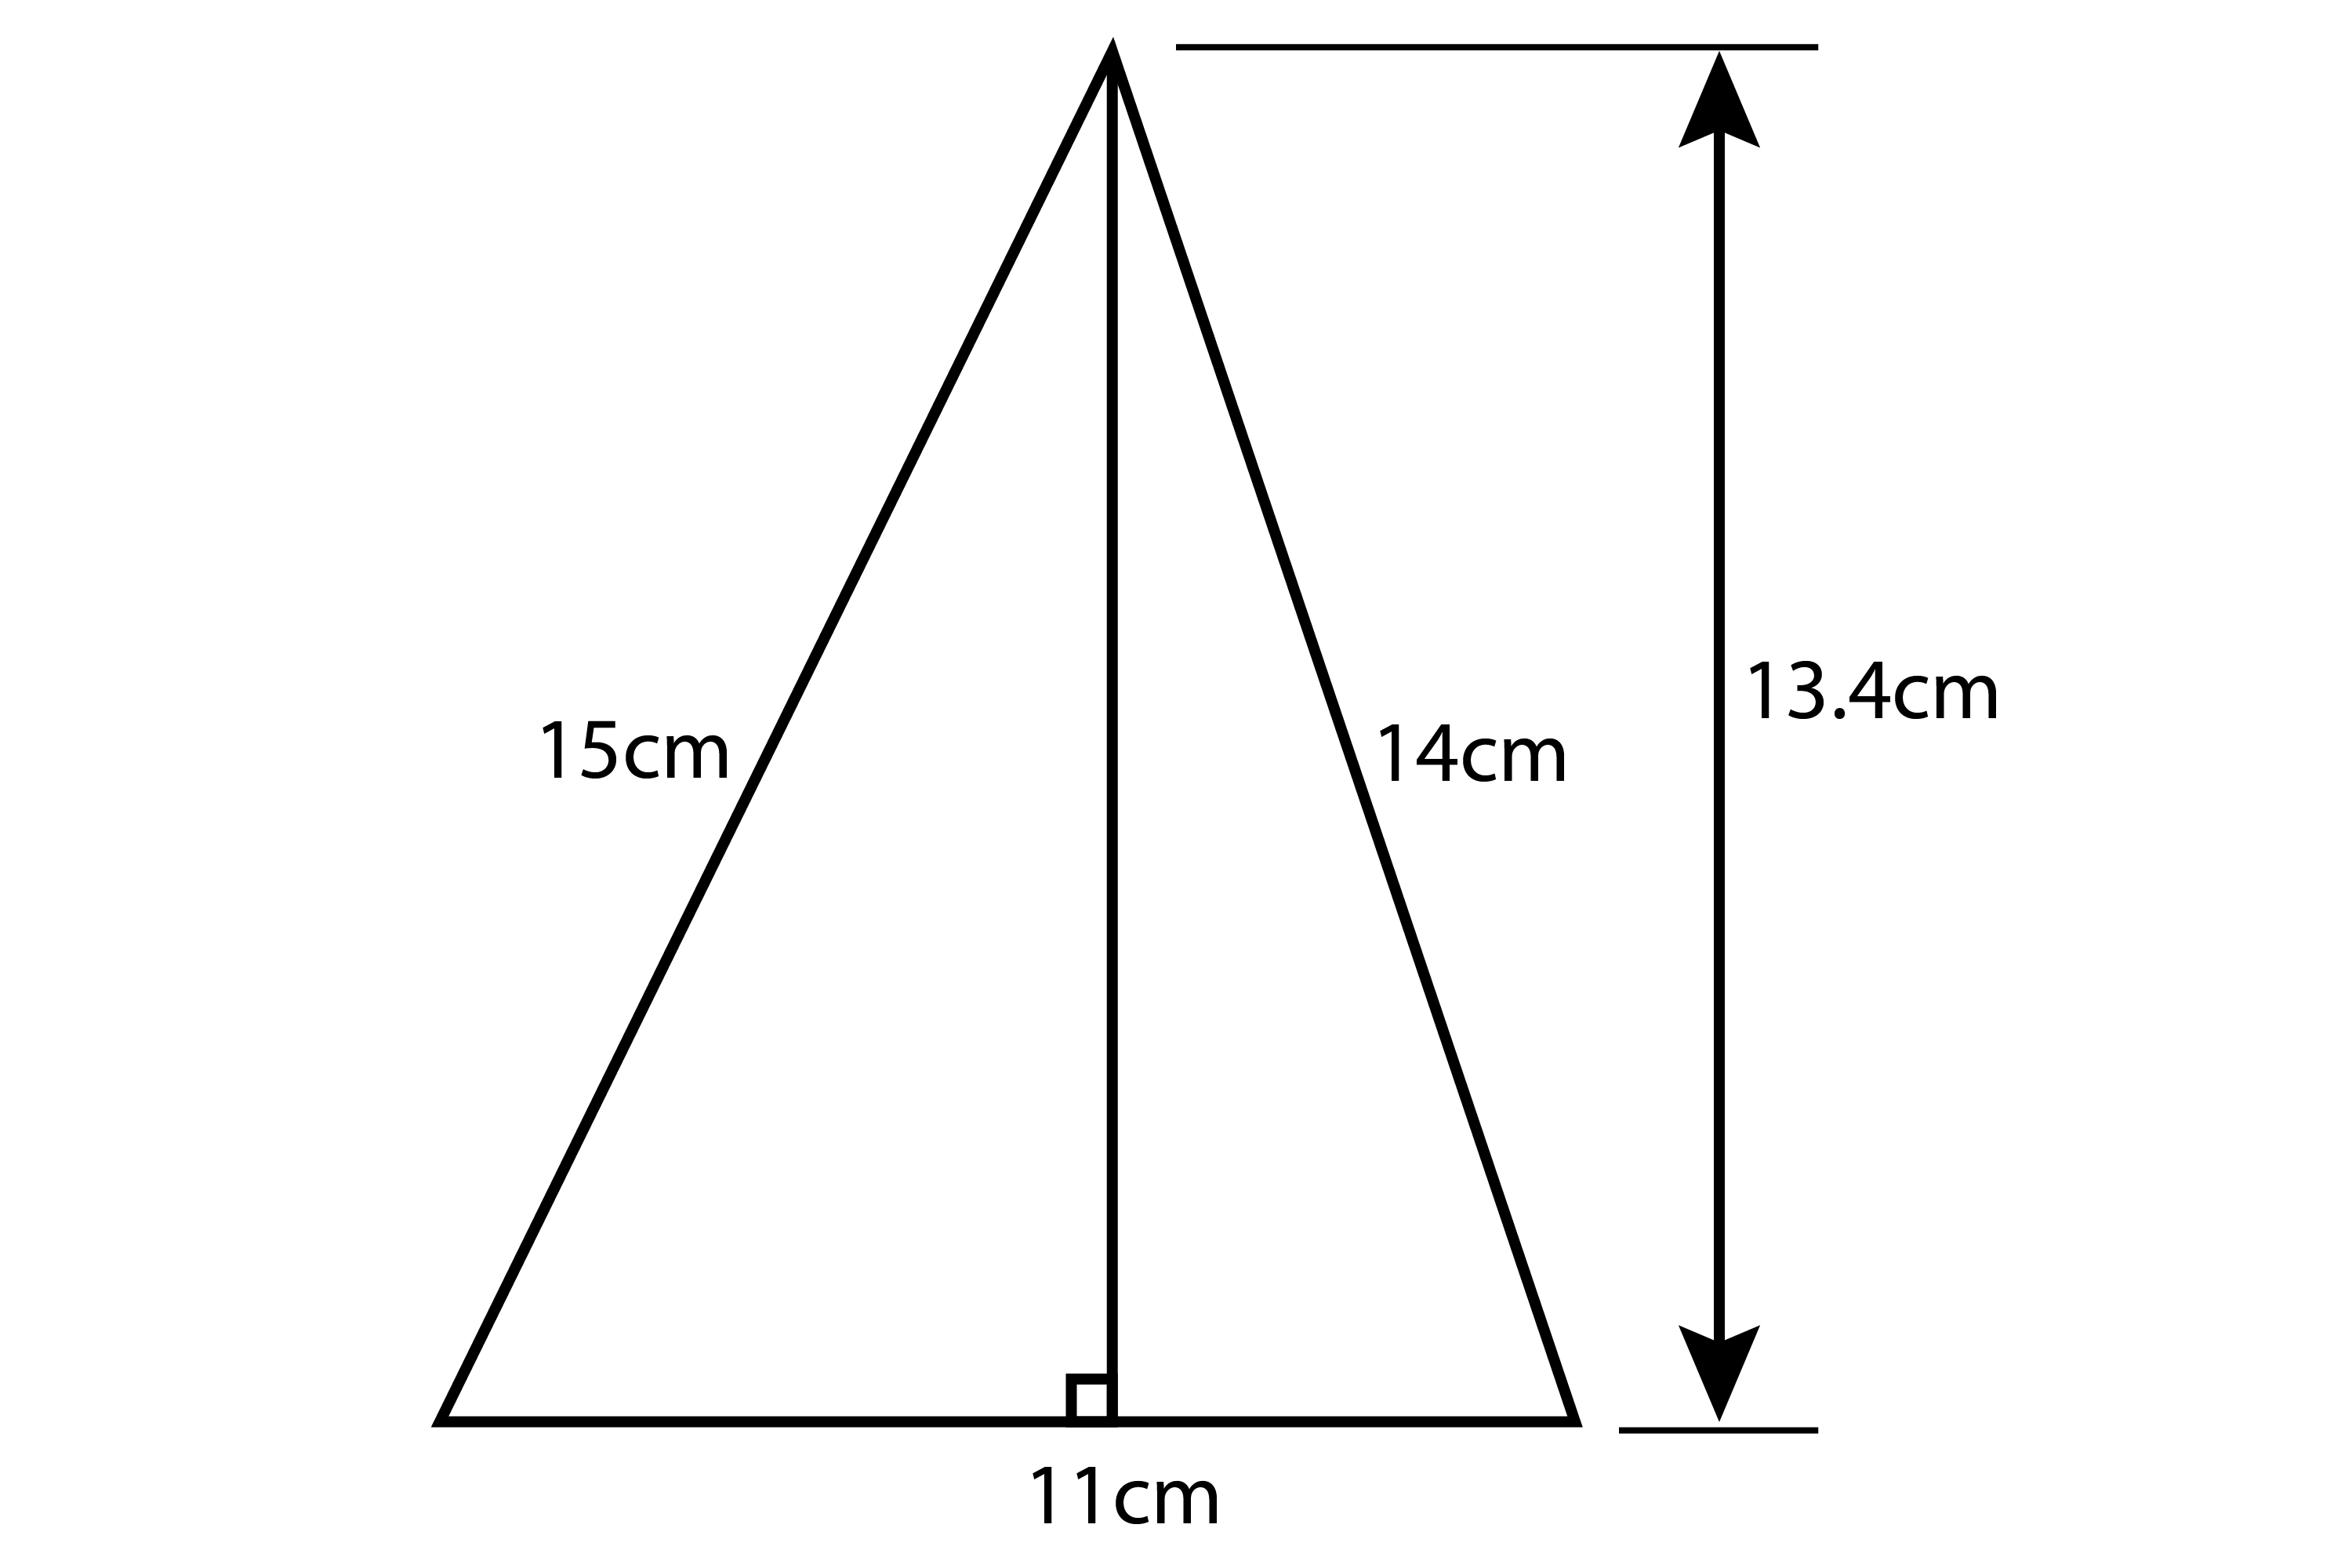 Try and work out the area of this triangle